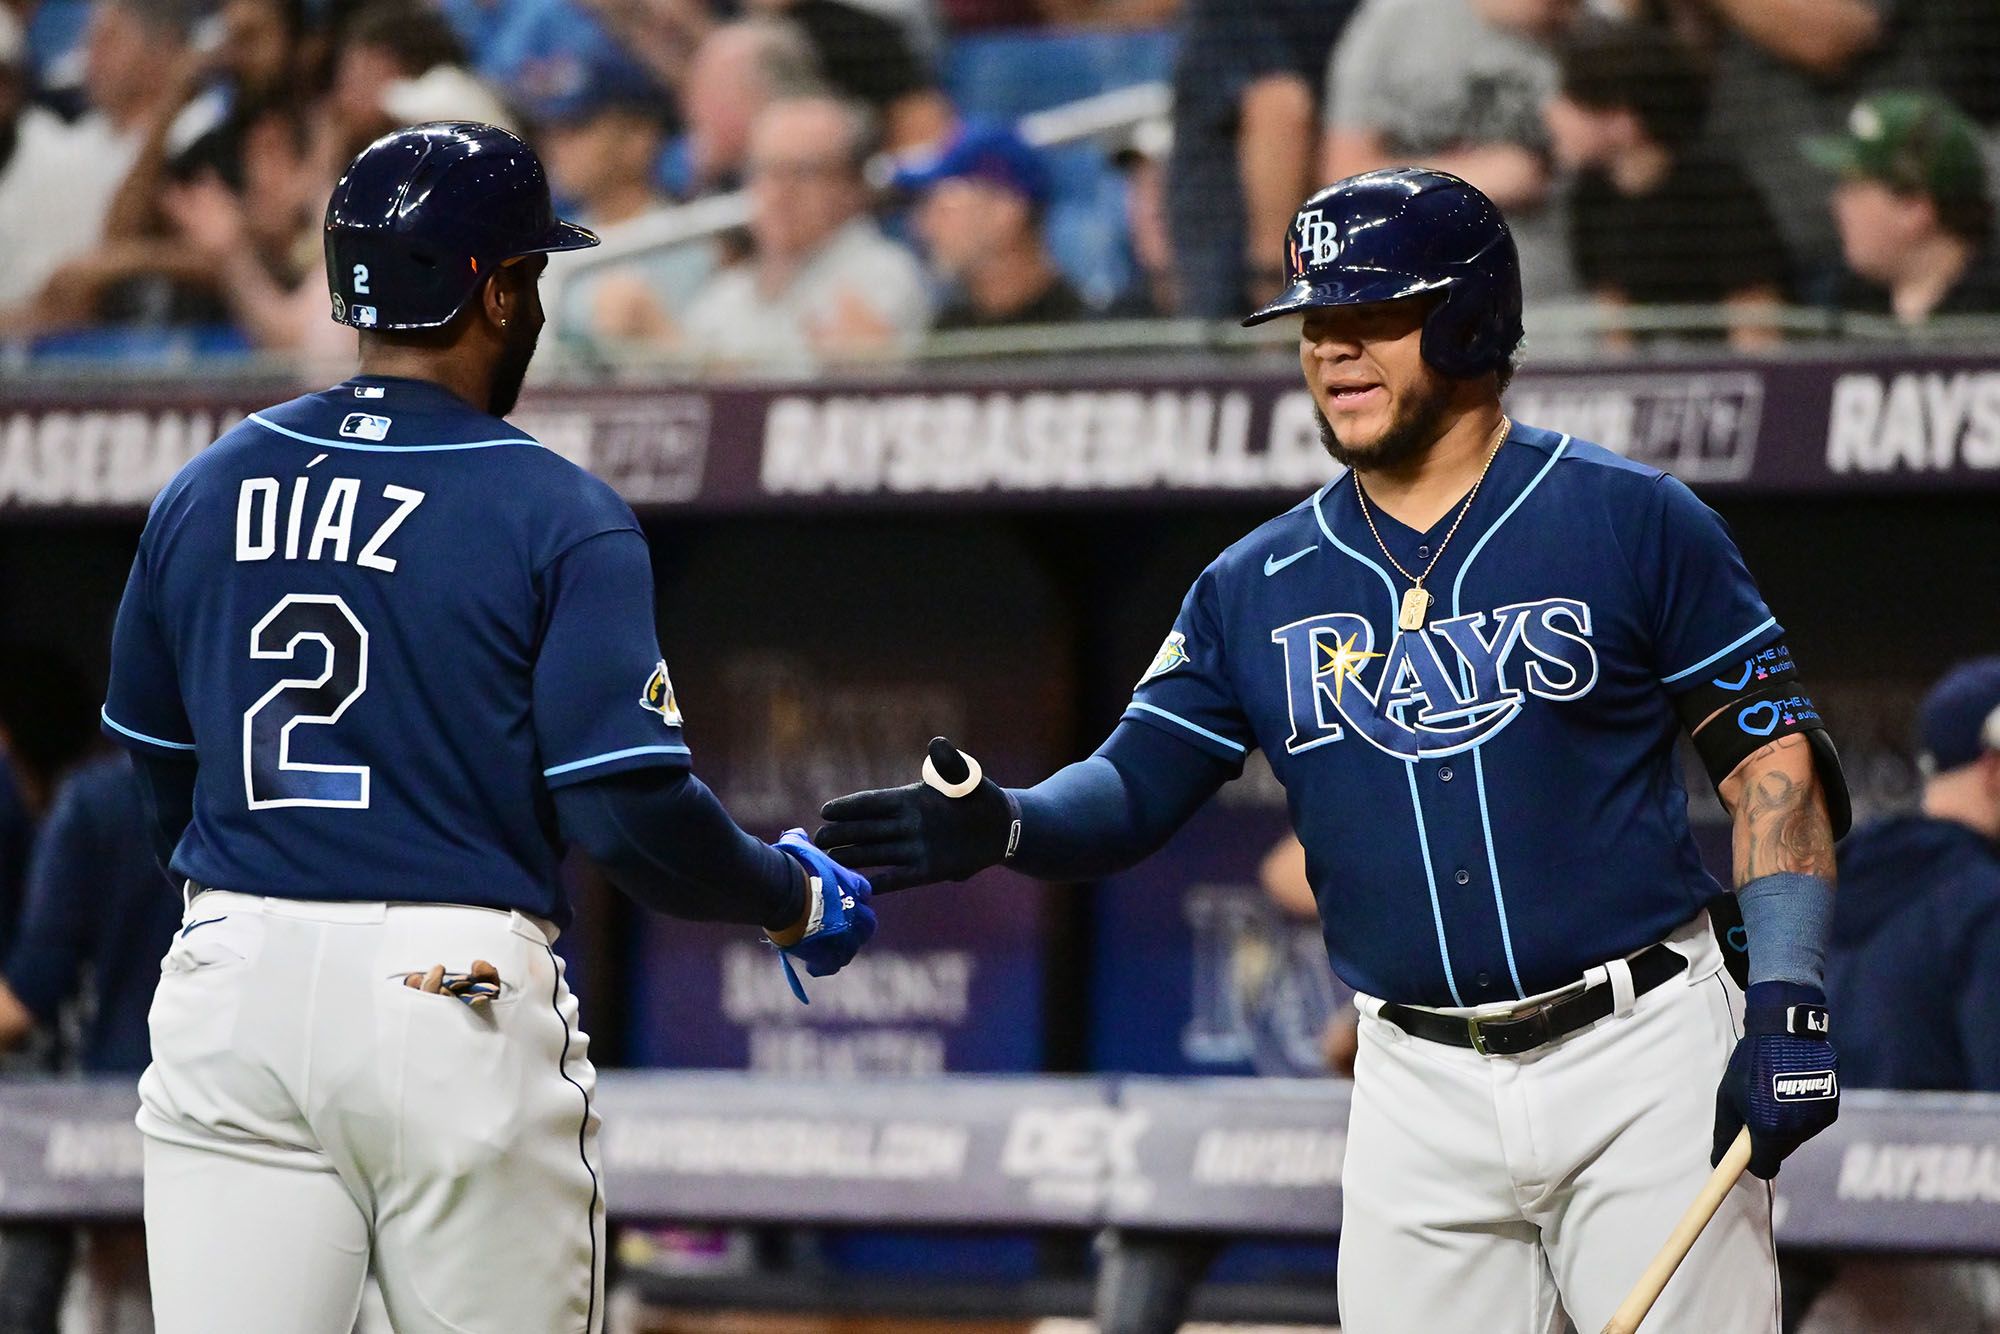 Tampa Bay Rays win MLB-record 14th-straight home game to open season